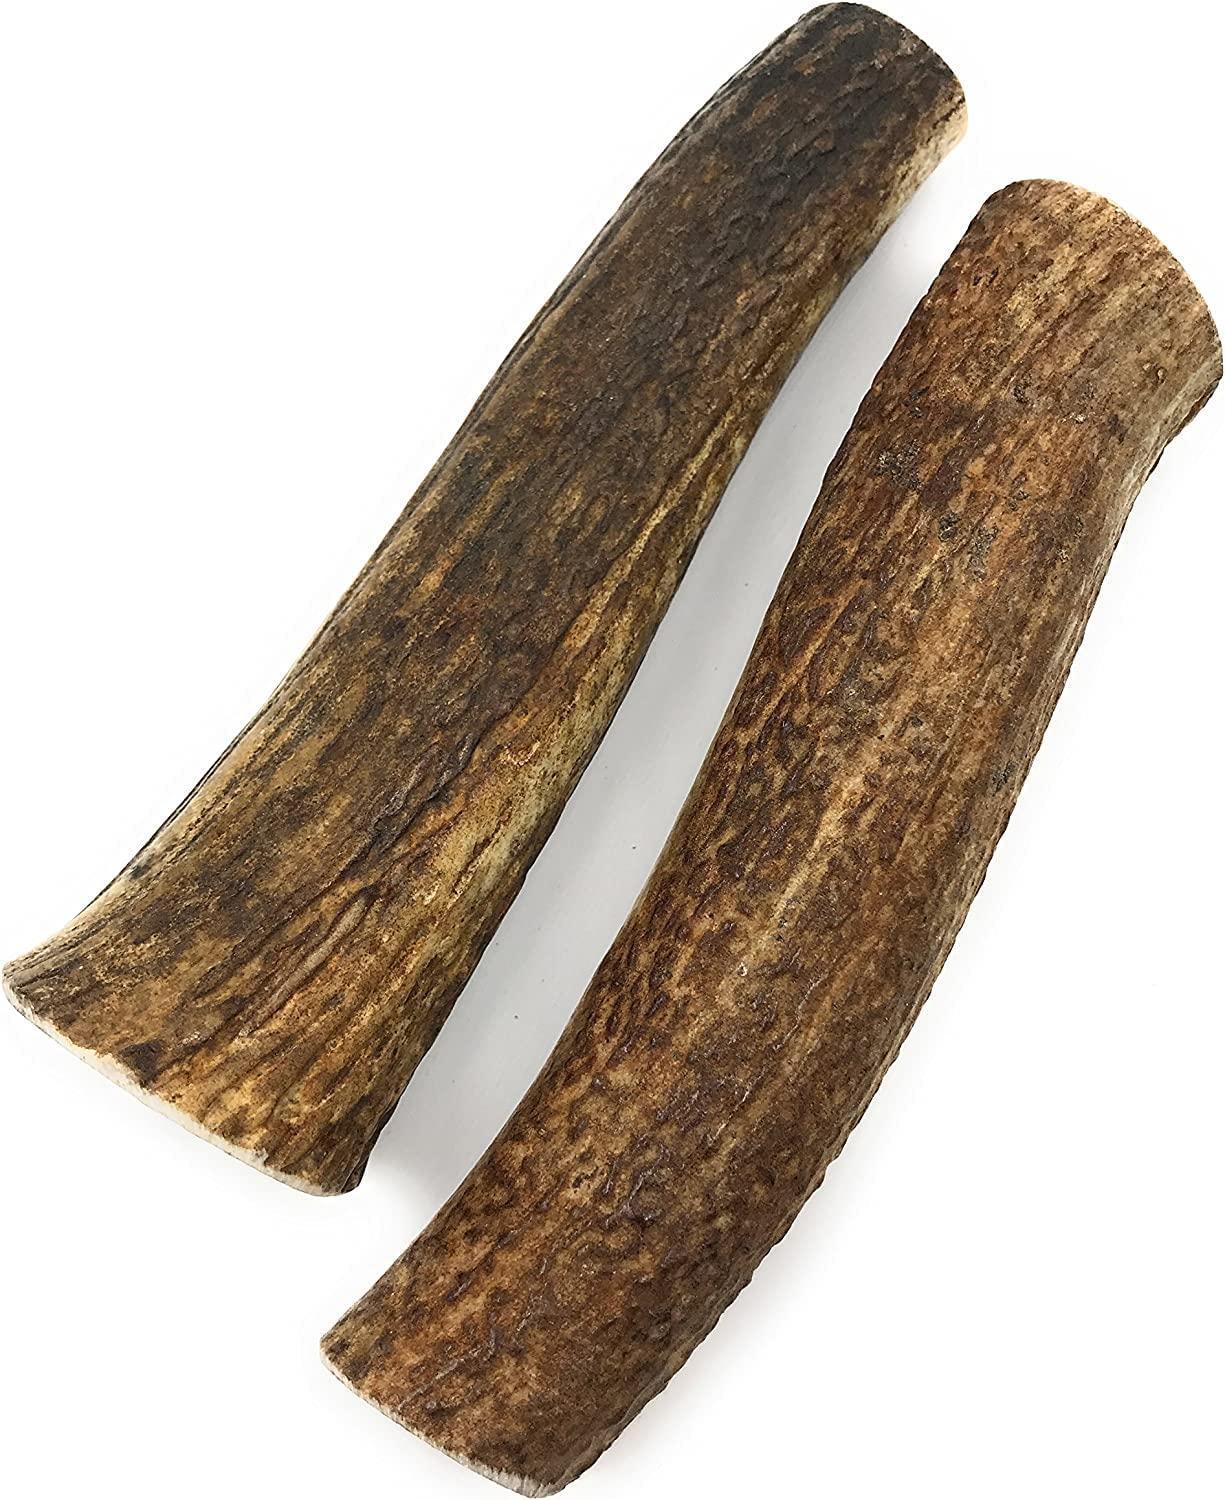 Elk Antlers for Dogs - Grade A, Naturally Shed Antlers | Long Lasting Dog Bones for Aggressive Chewers & Teething Puppies | All Breeds Chew Toy USA Made & Veteran Owned | Large: 7 Whole Elk, 2-Pack